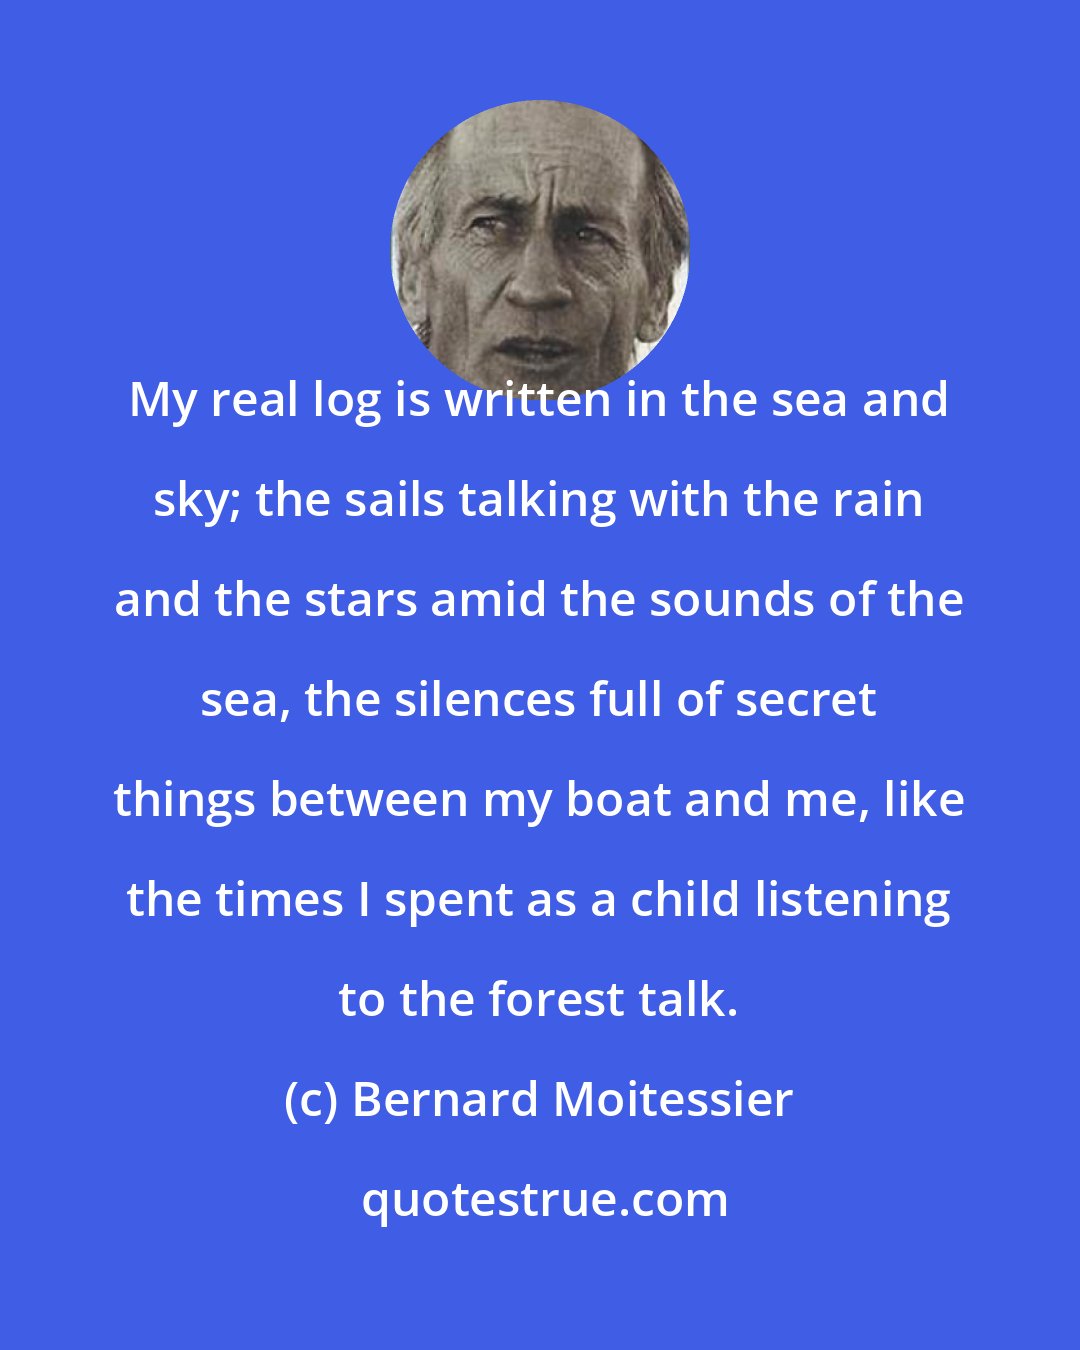 Bernard Moitessier: My real log is written in the sea and sky; the sails talking with the rain and the stars amid the sounds of the sea, the silences full of secret things between my boat and me, like the times I spent as a child listening to the forest talk.